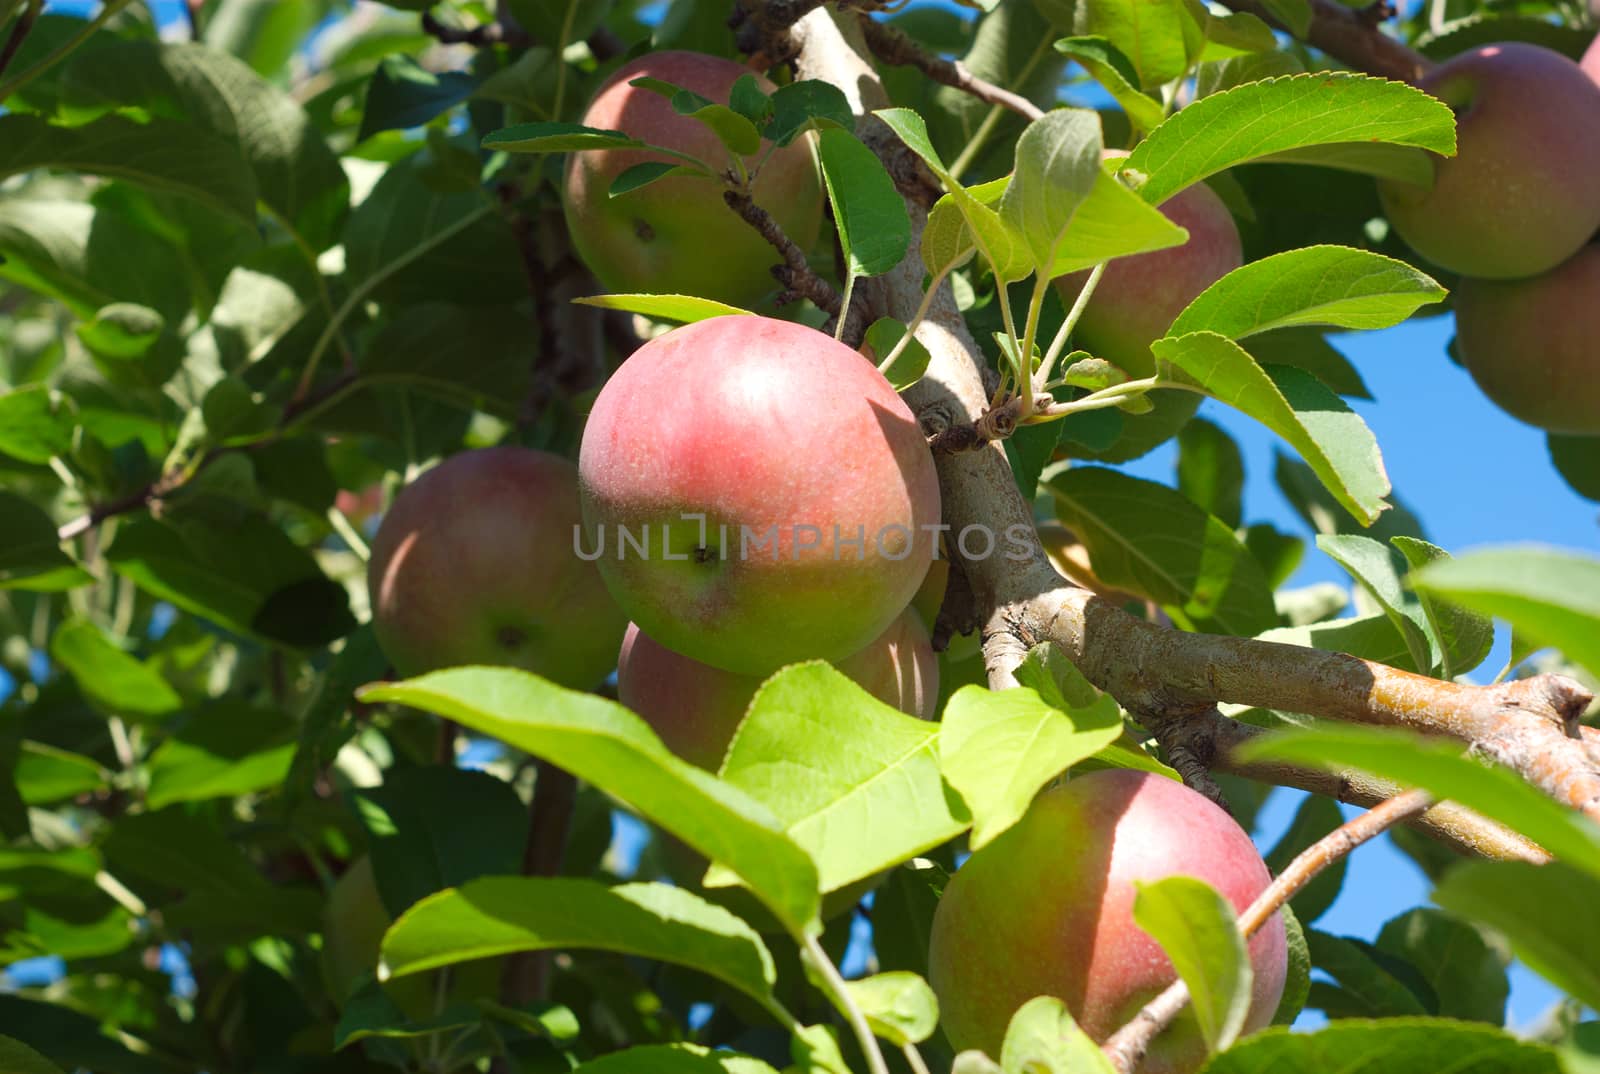 apples in a tree at the orchard leafs and branch by jacquesdurocher